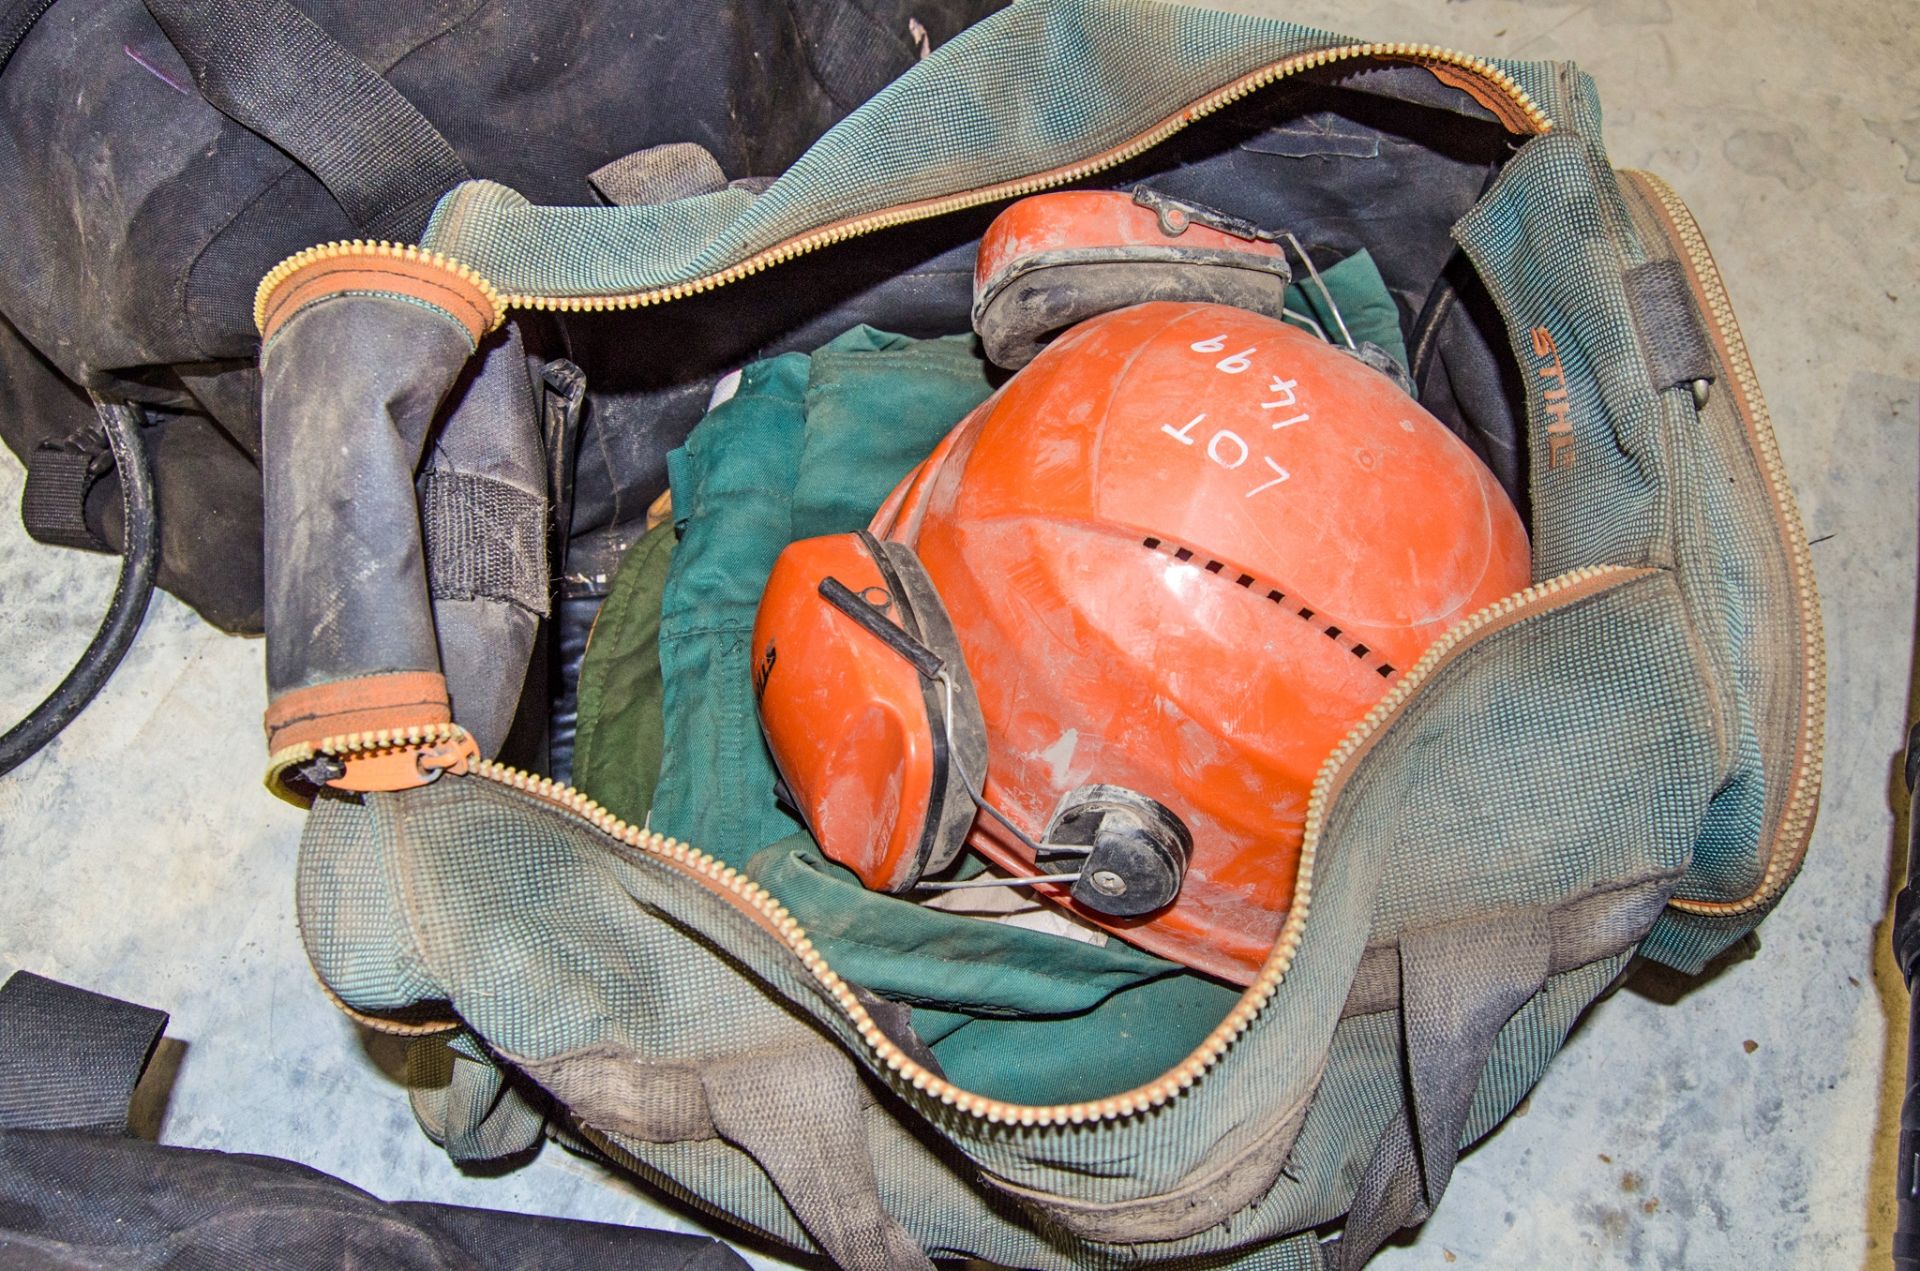 Bag of chainsaw personnel protection gear